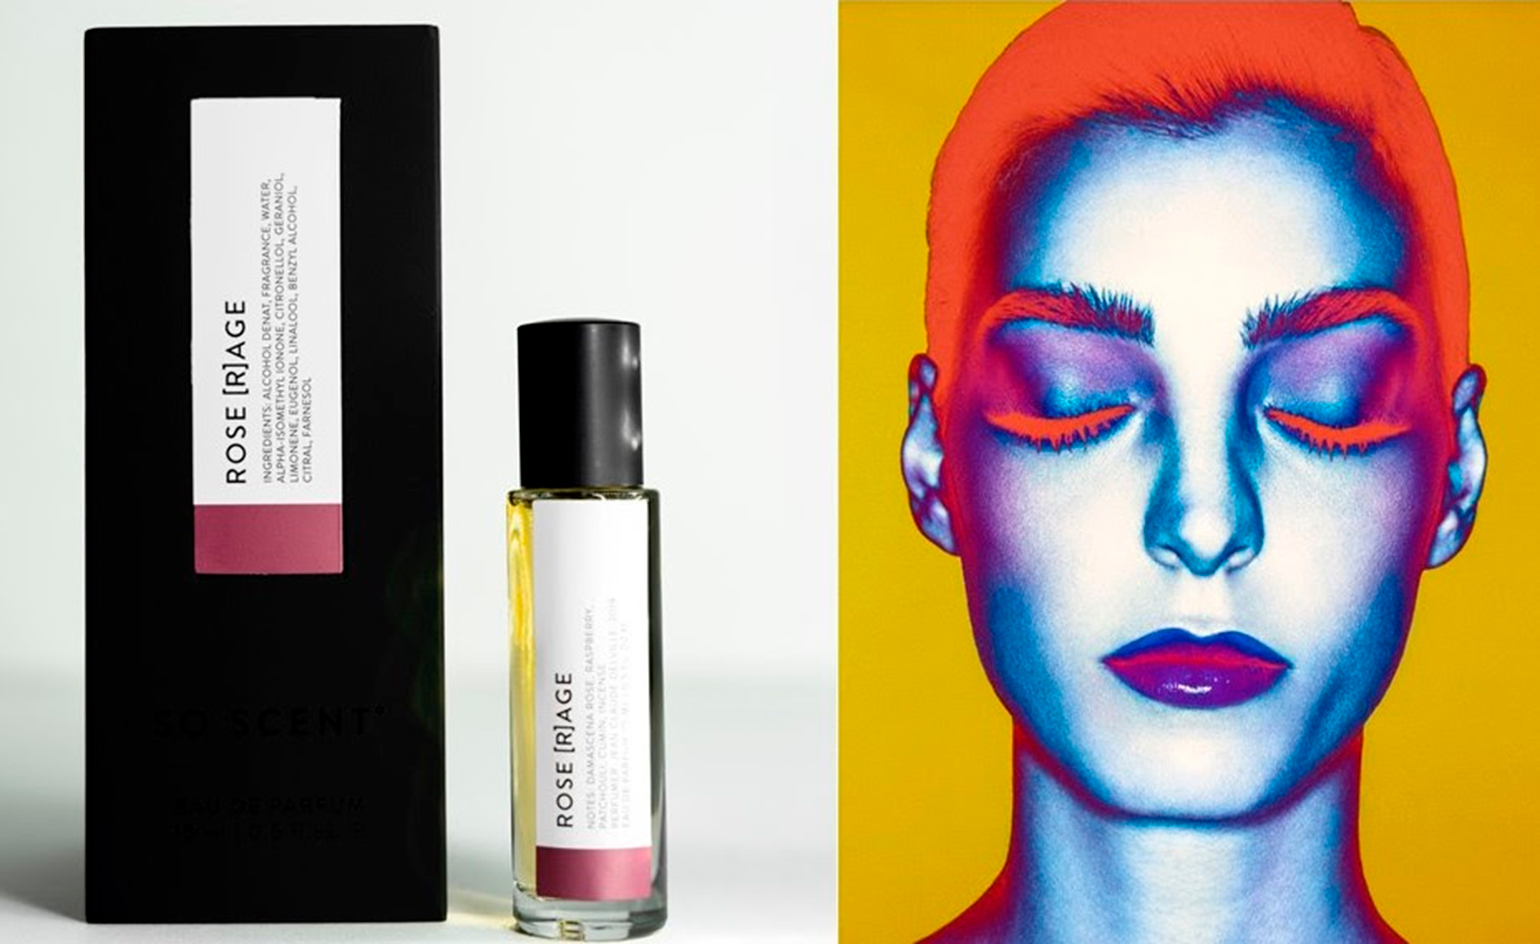 Nose in a book: 'So Scent' blends perfumery and photography